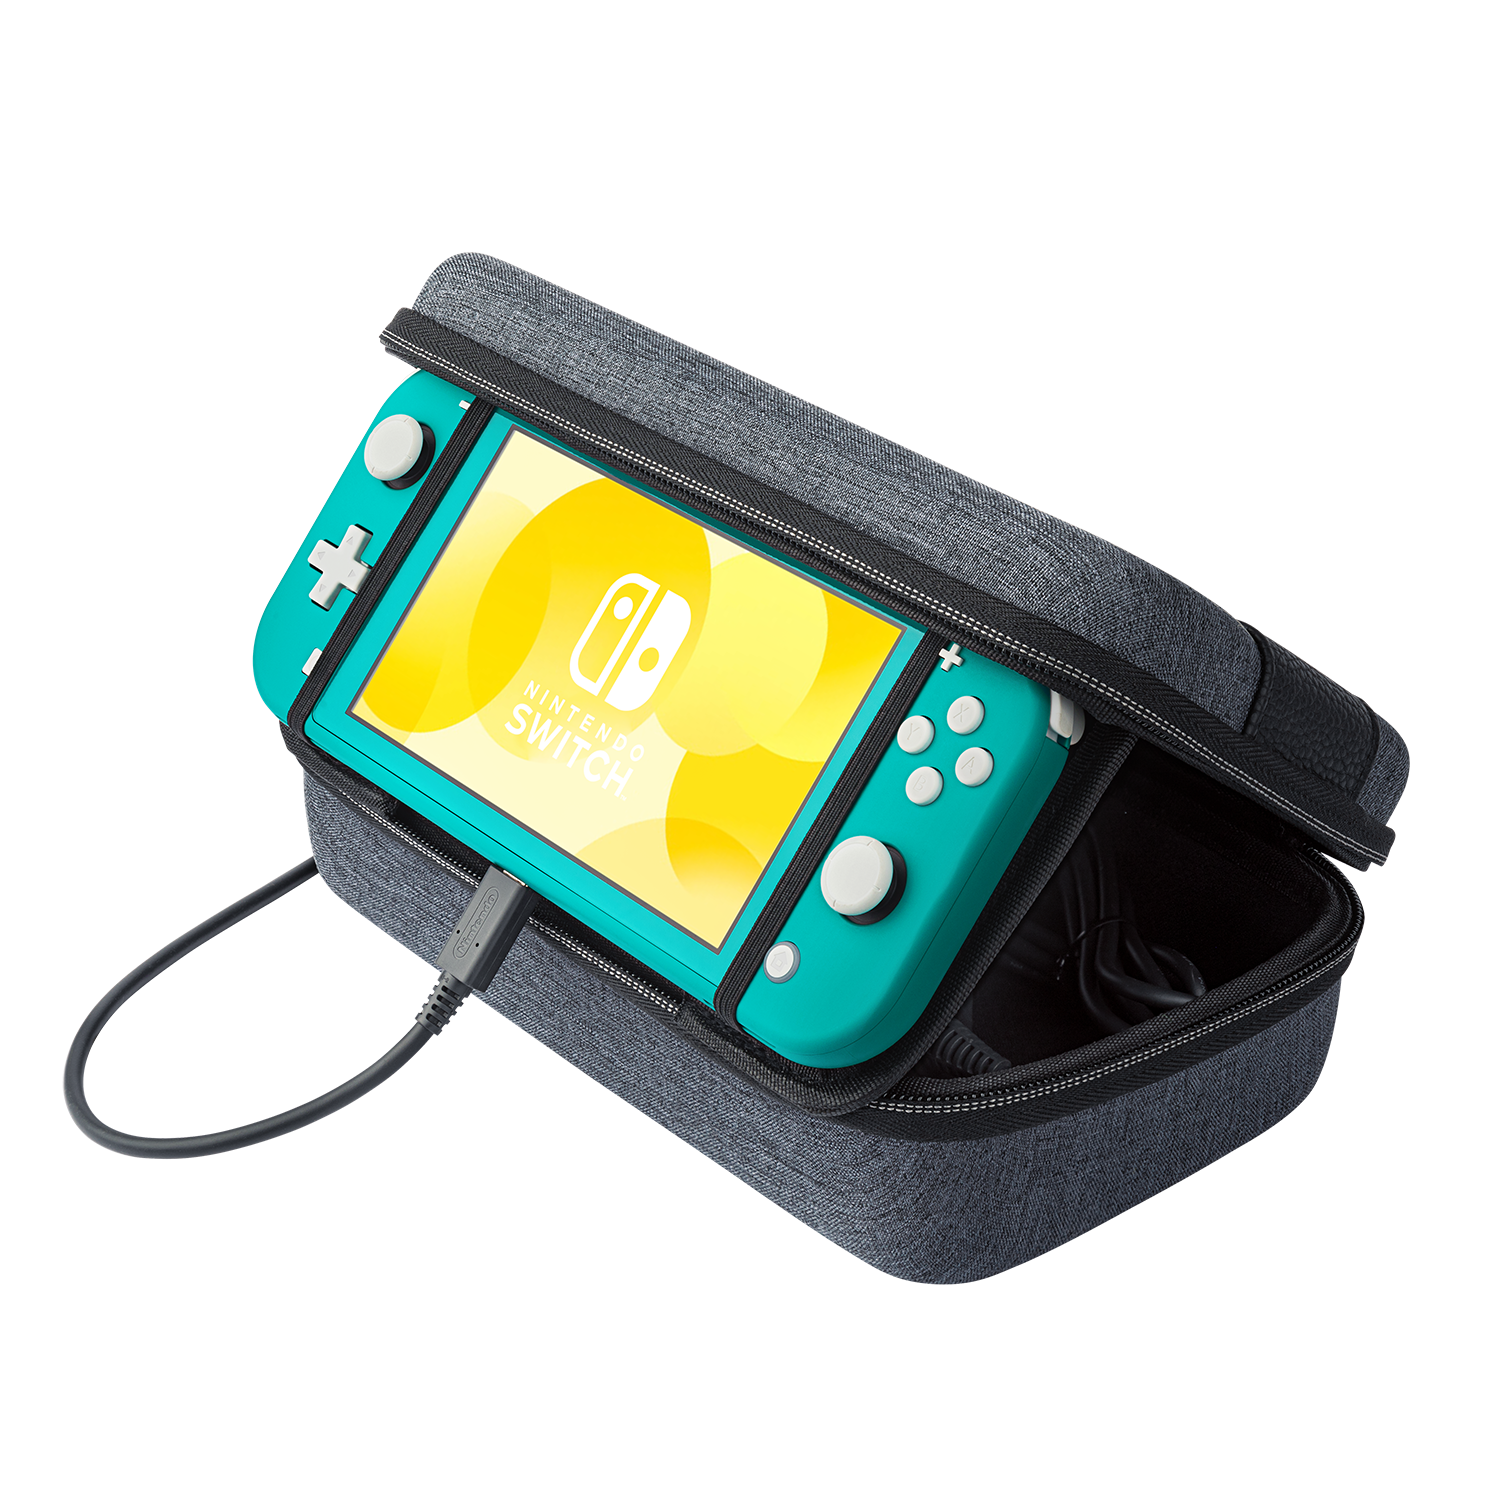 Nintendo Switch & Charge Case